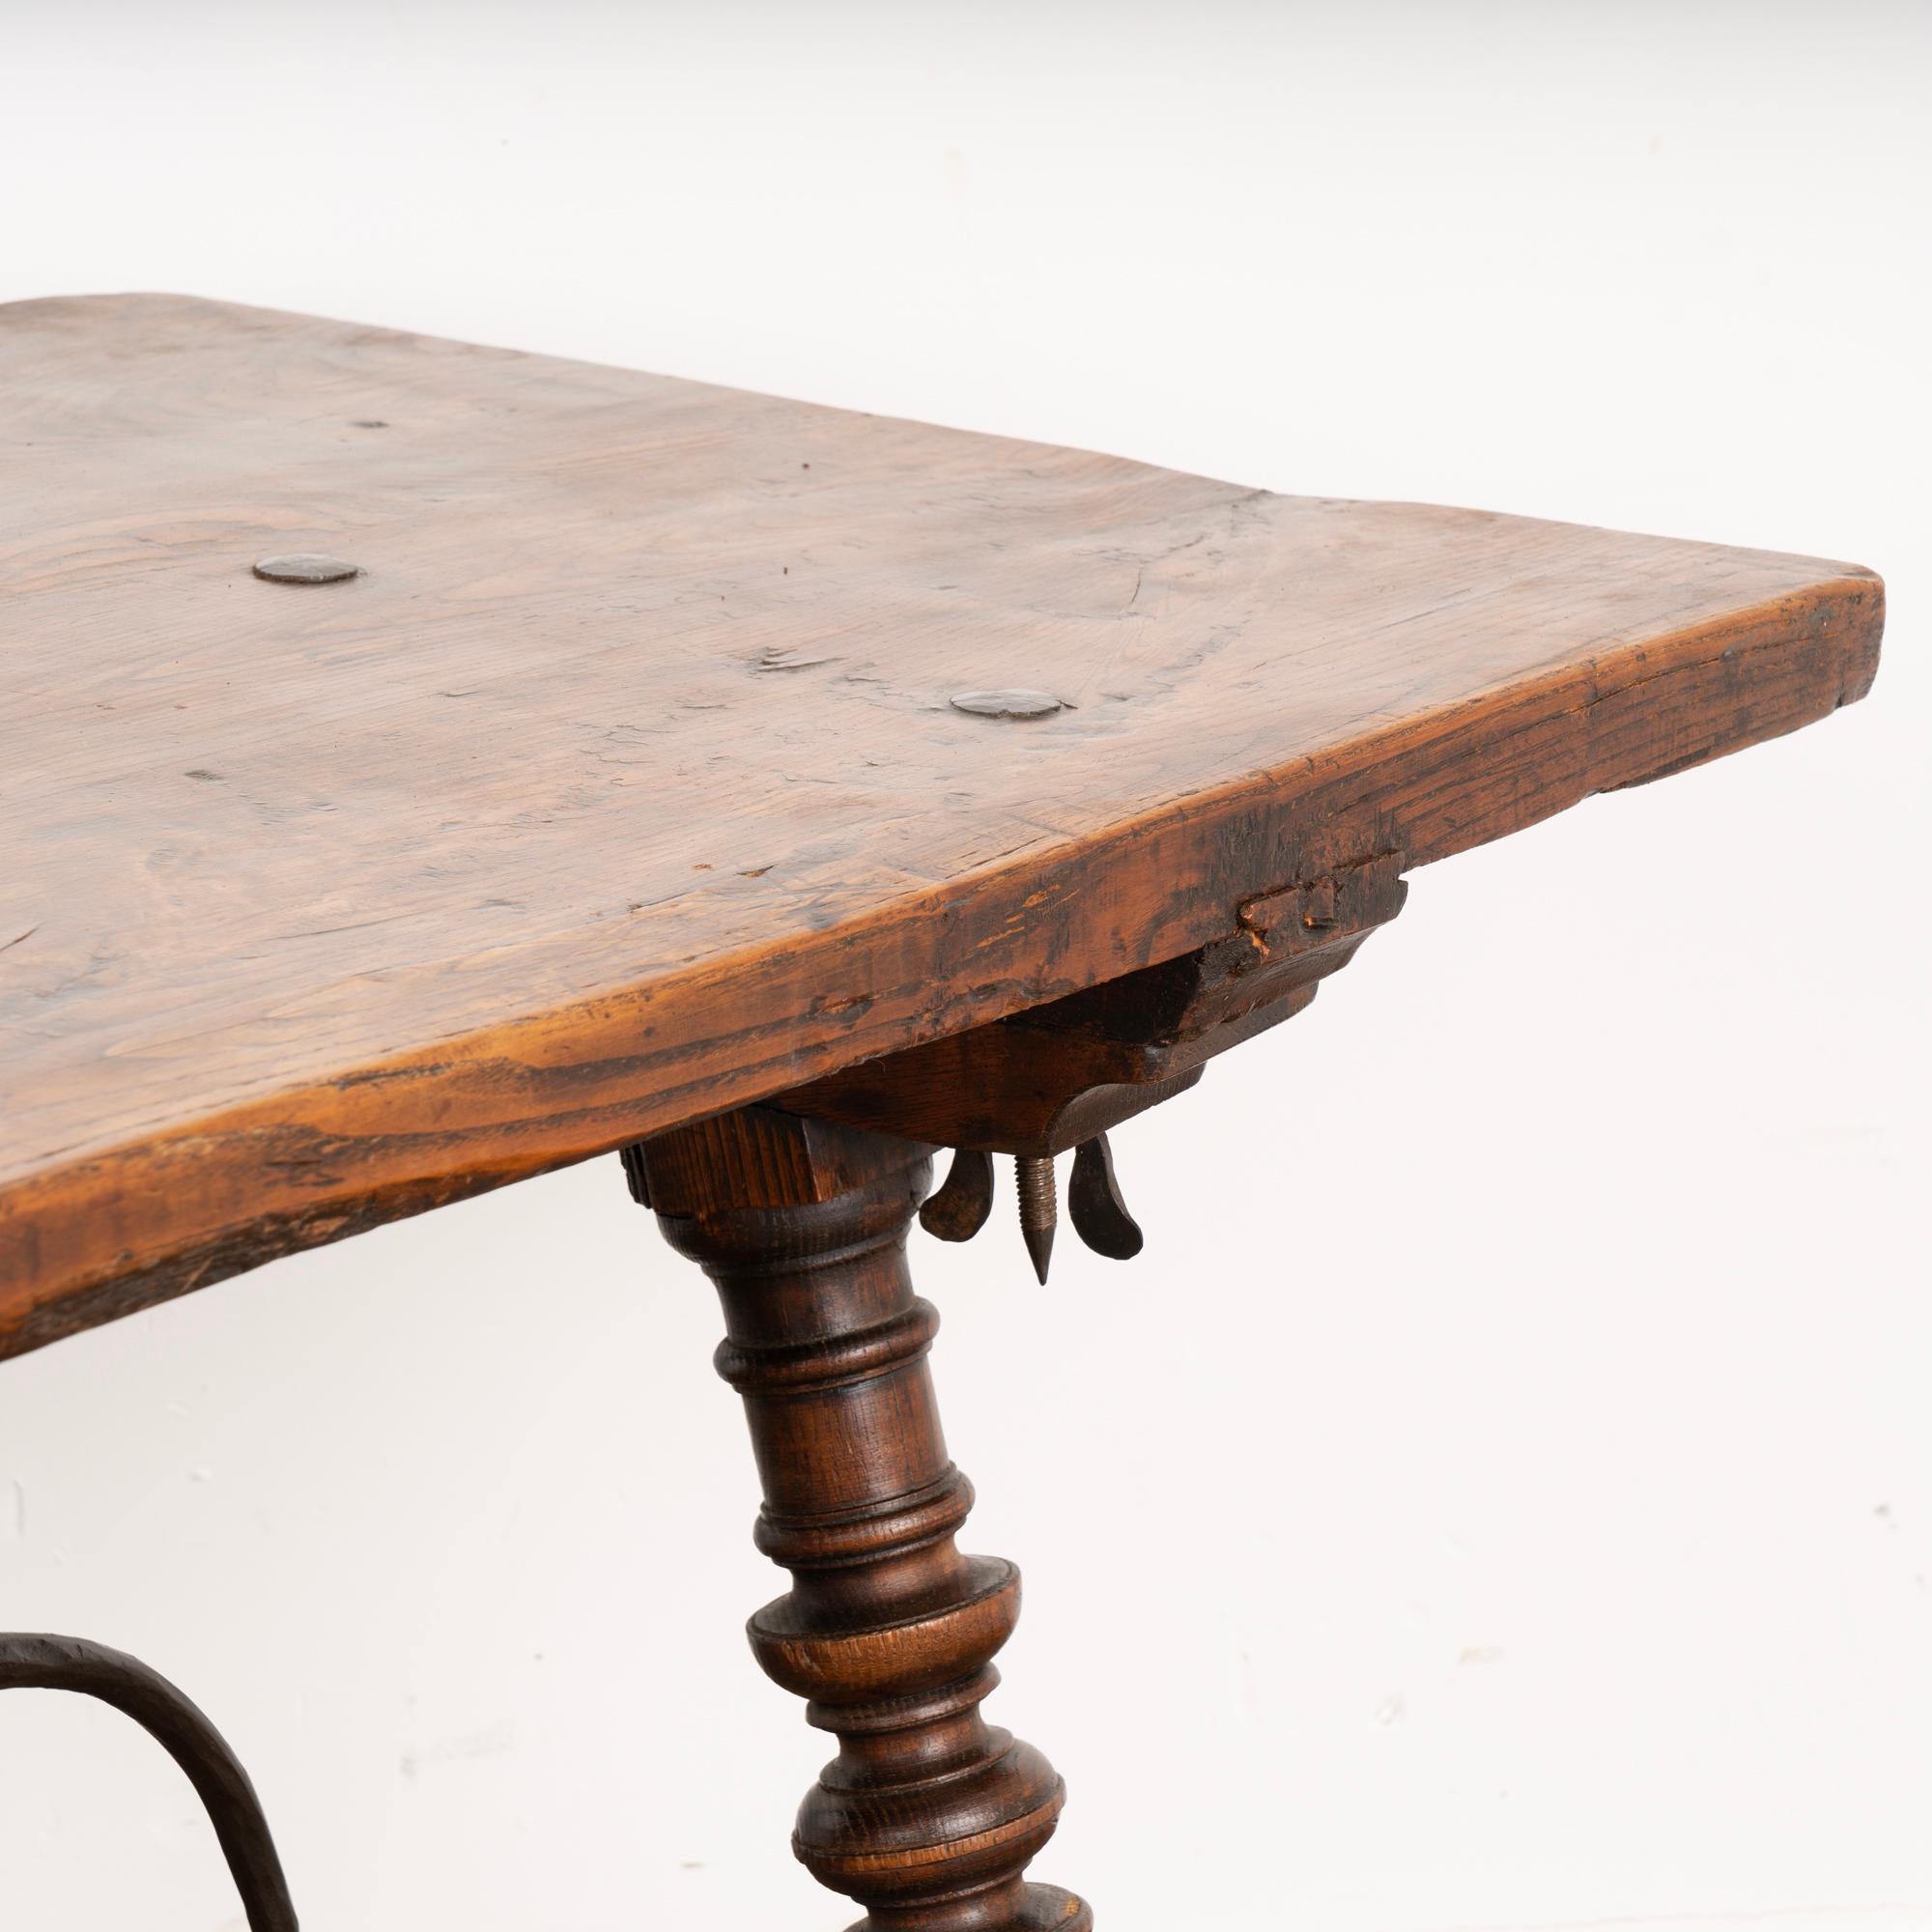 Spanish Antique Dining Table with Turned Legs and Scrolled Iron Stretcher from Spain